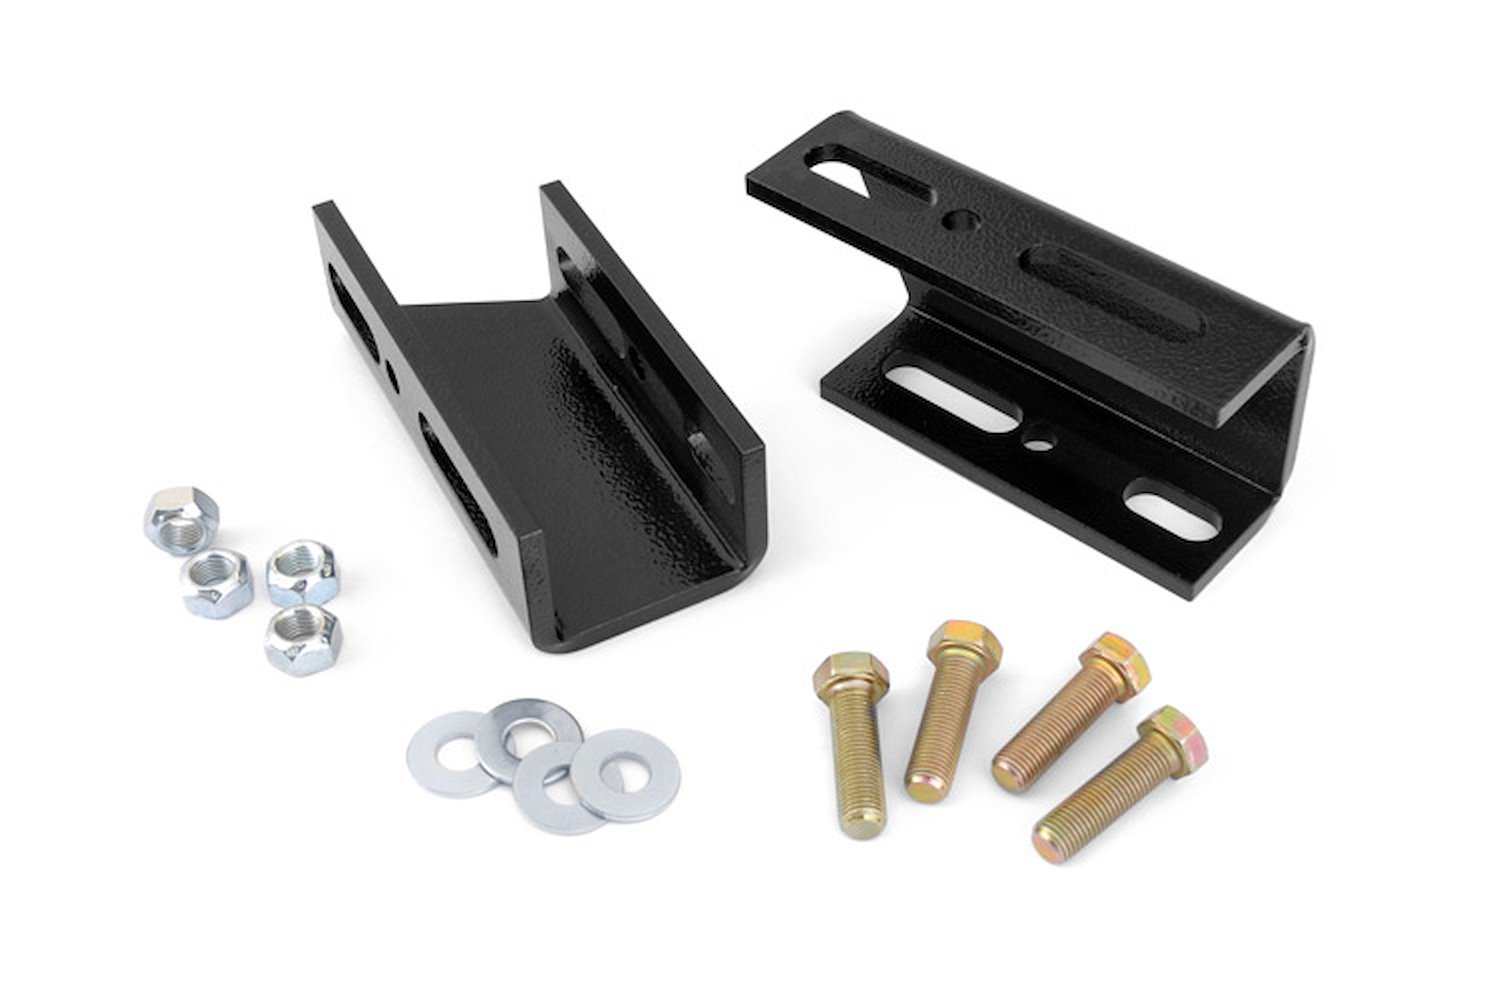 1019 Front Sway Bar Drop Brackets for 2-6-inch Lifts